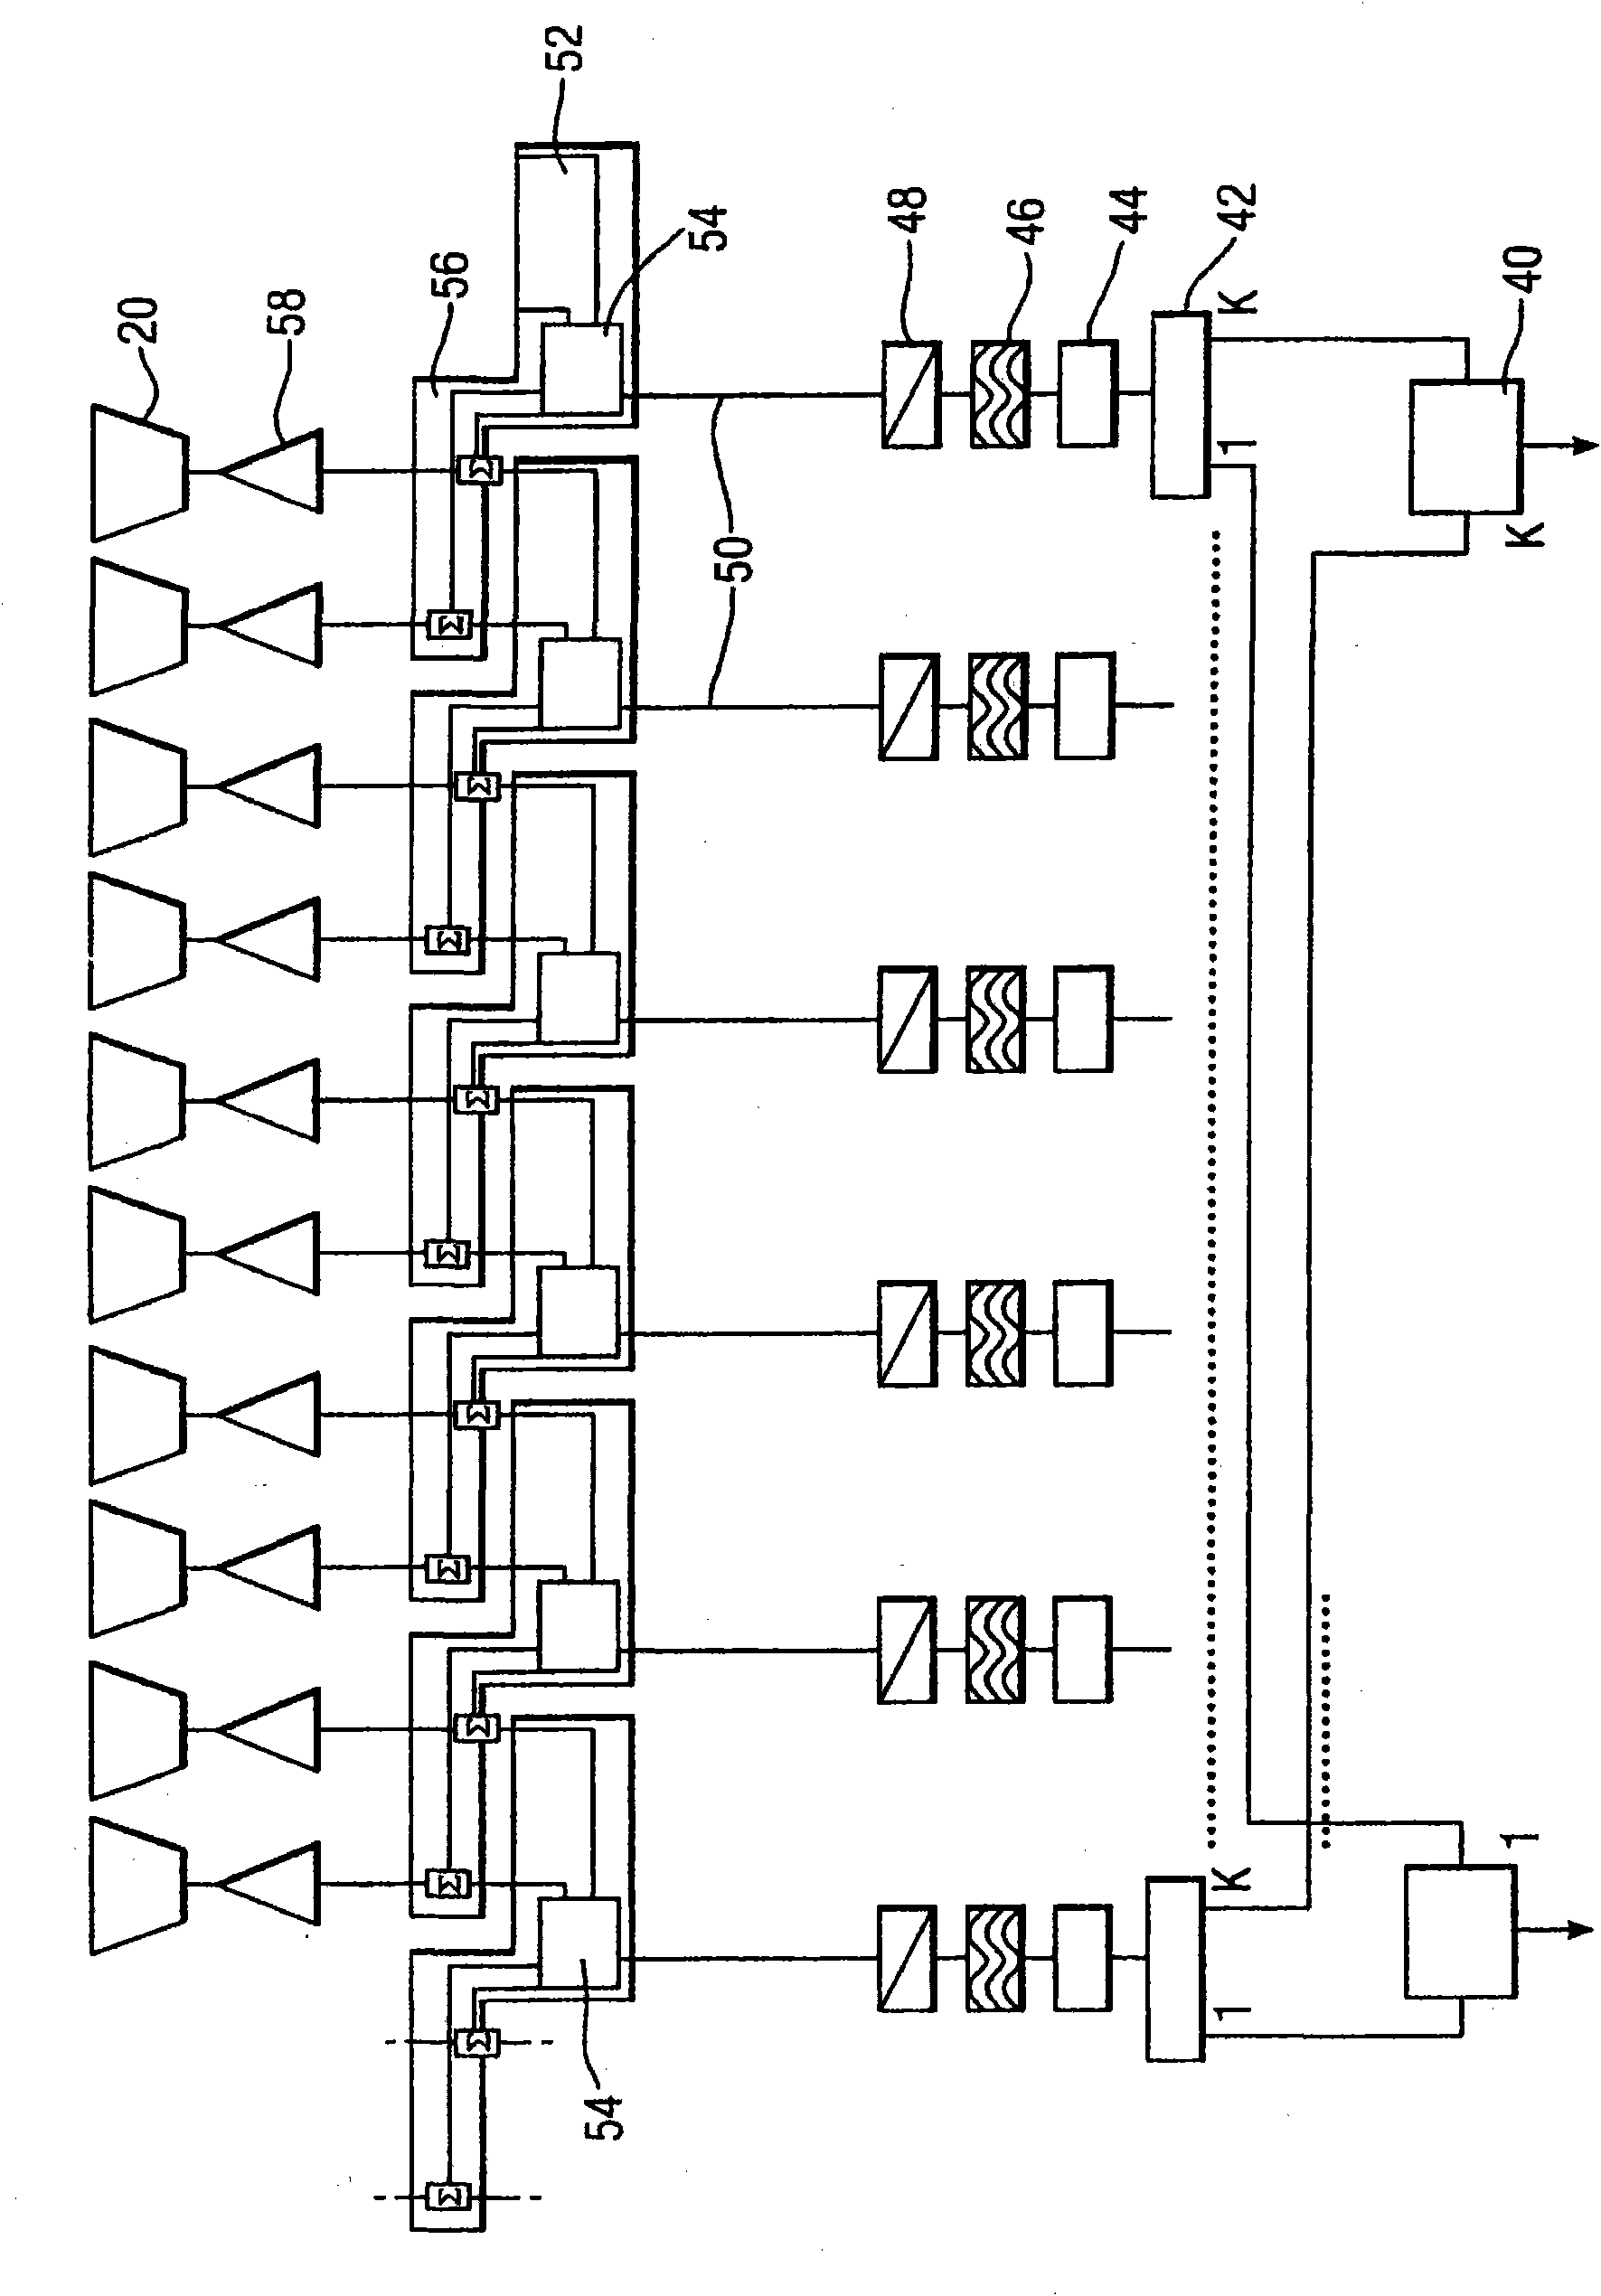 System for simplification of reconfigurable beam-forming network processing within a phased array antenna for a telecommunications satellite